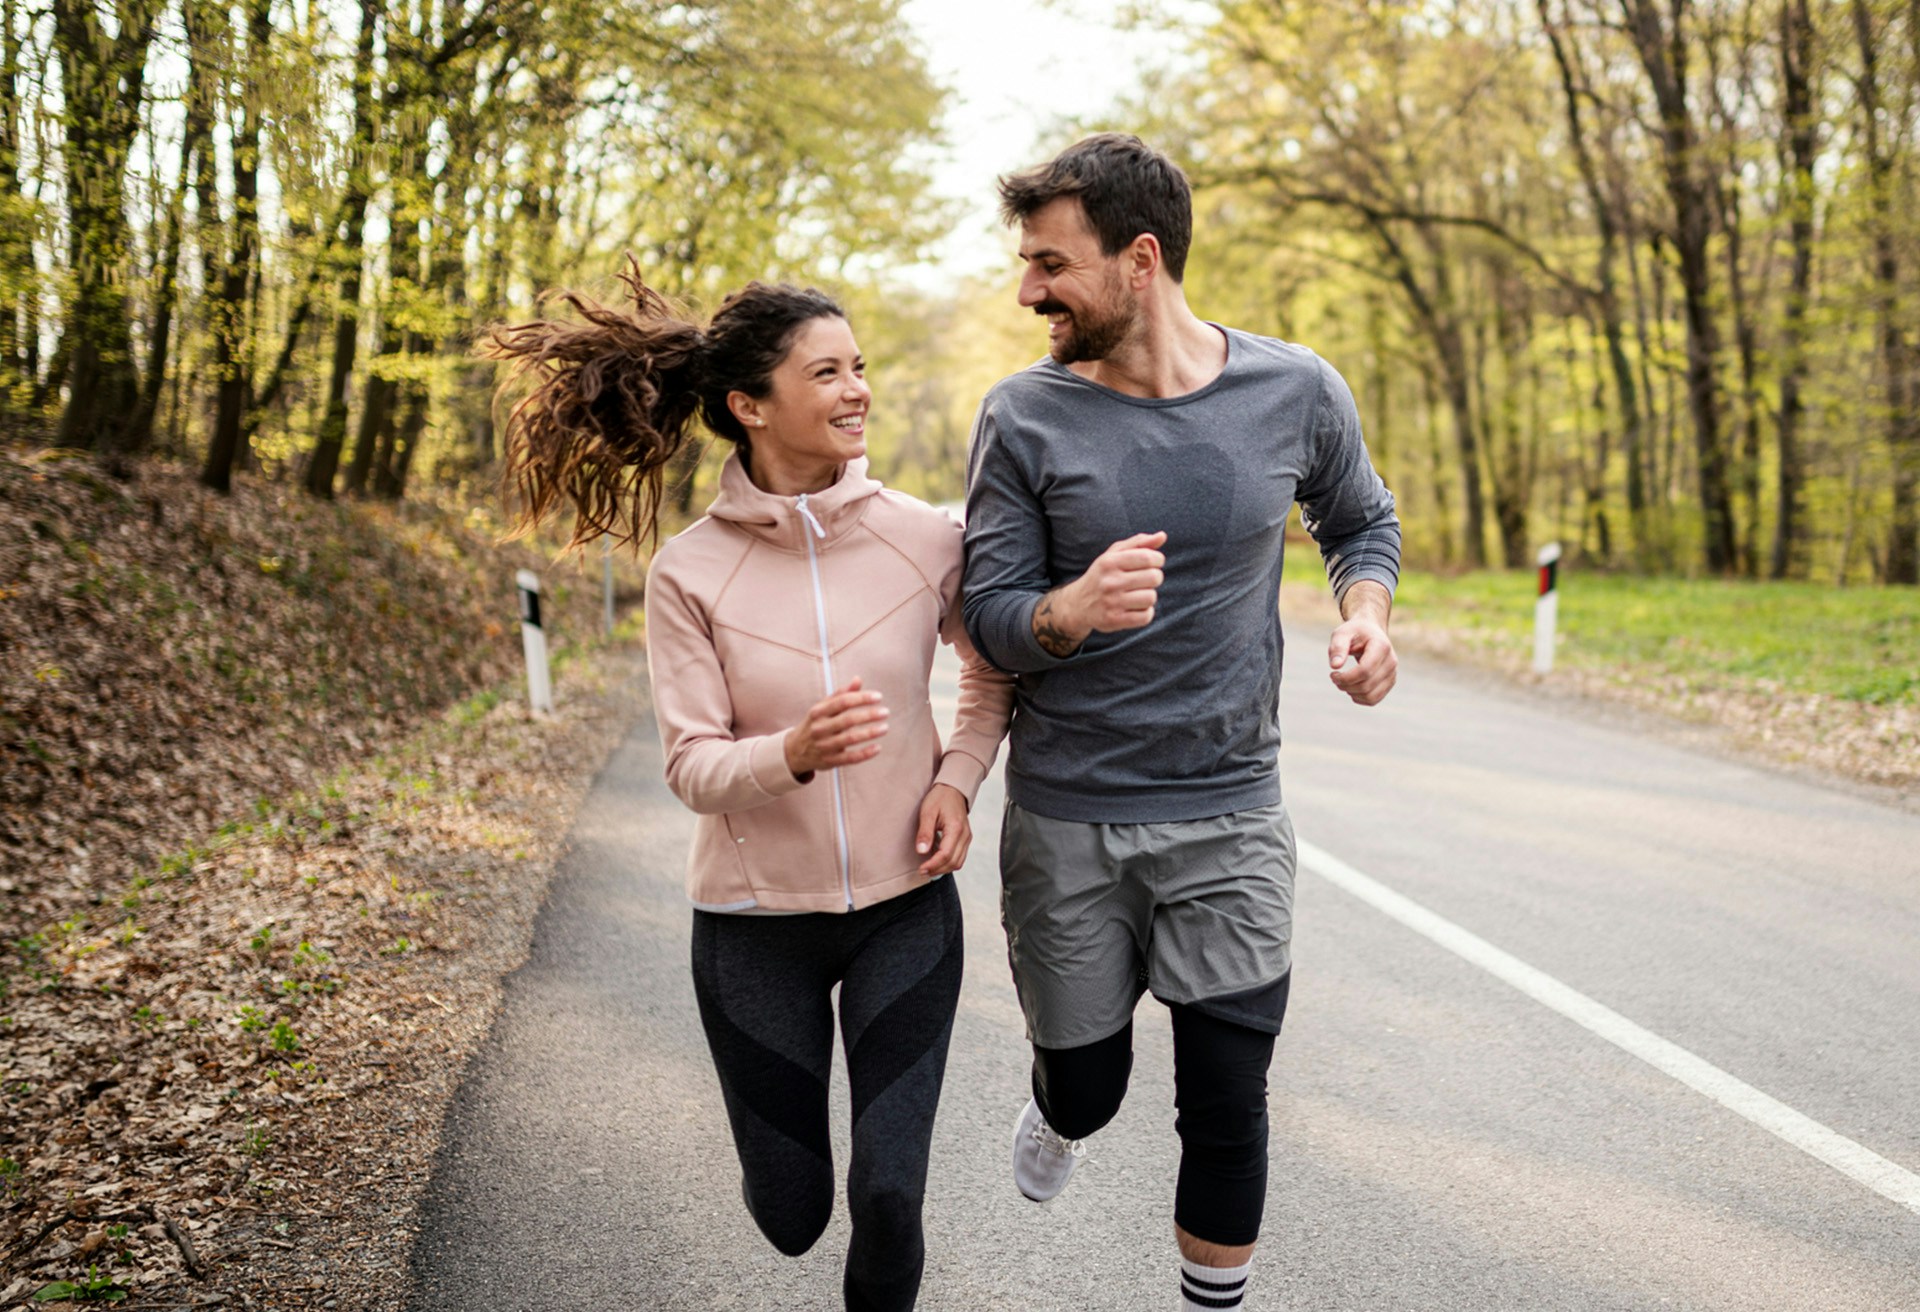 Man and woman running together smiling